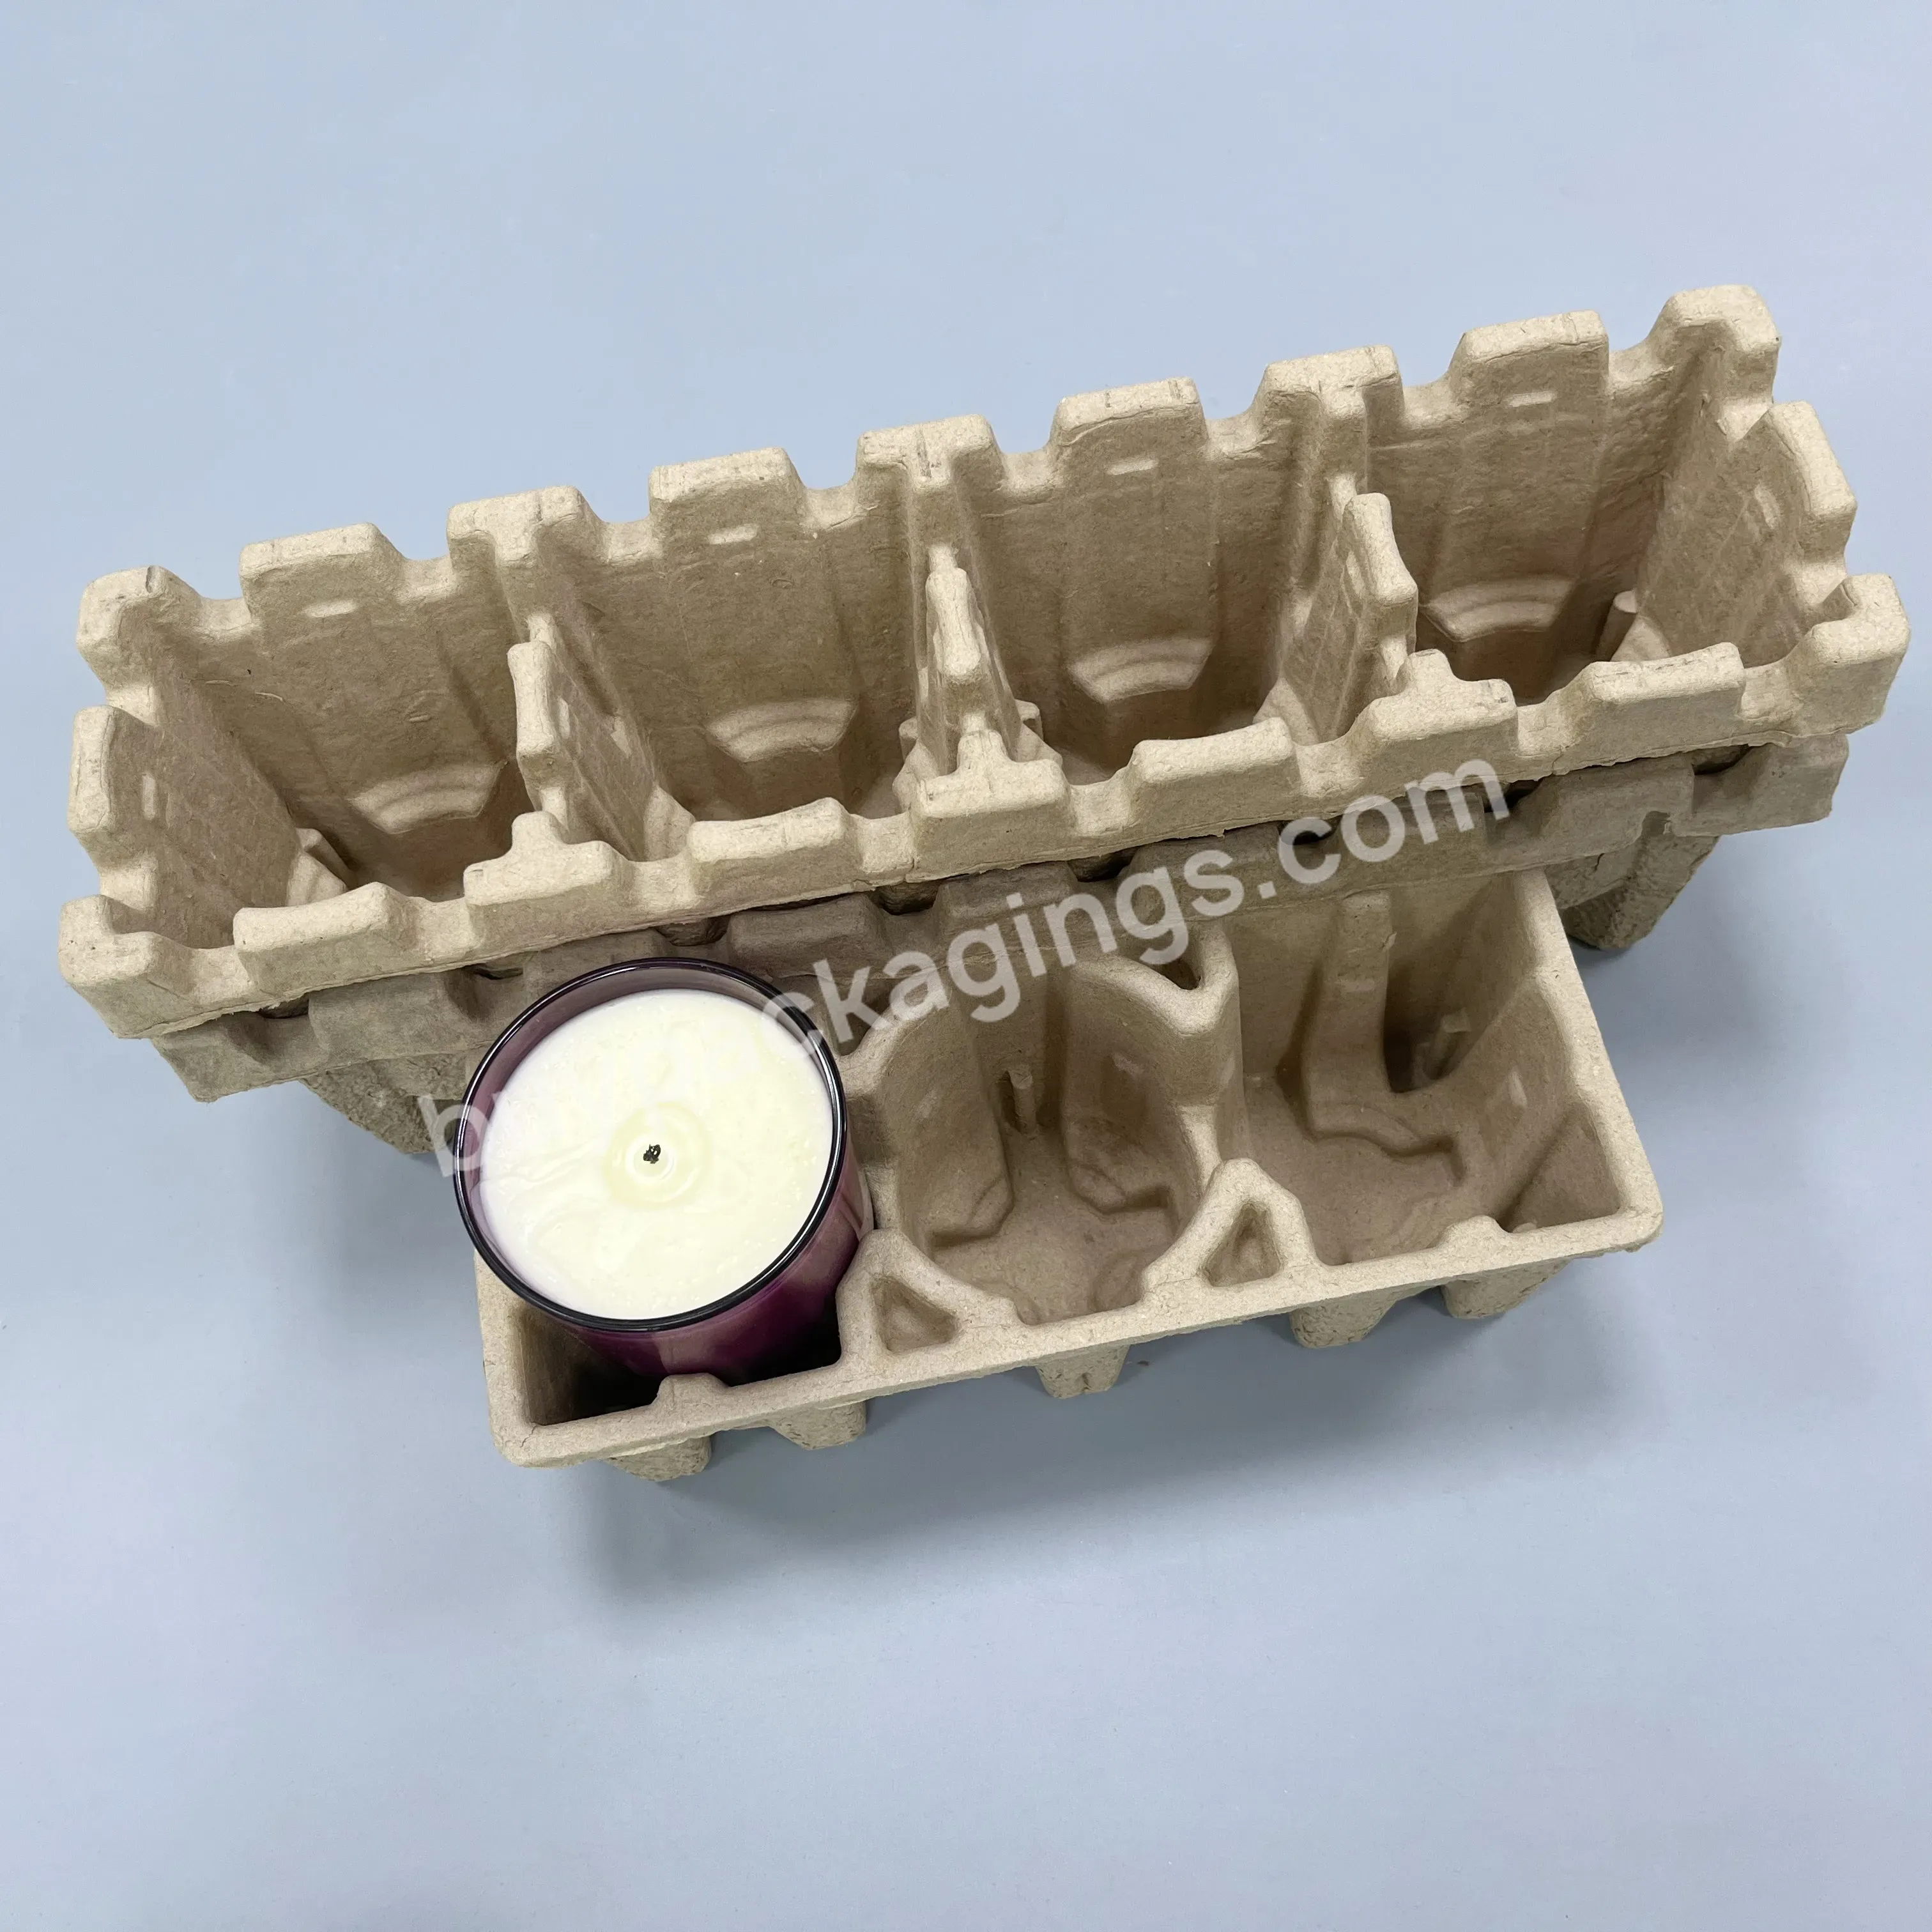 Custom Shape Oem Mold Made Biodegradable Paper Inner Packaging Box Pulp Insert Tray Recycled Eco Friendly - Buy Molded Paper Pulp Tray Pulp Insert,Recycled Pulp Packaging Pulp Insert,Biodegradable Paper Pulp Insert Tray Pulp Insert.